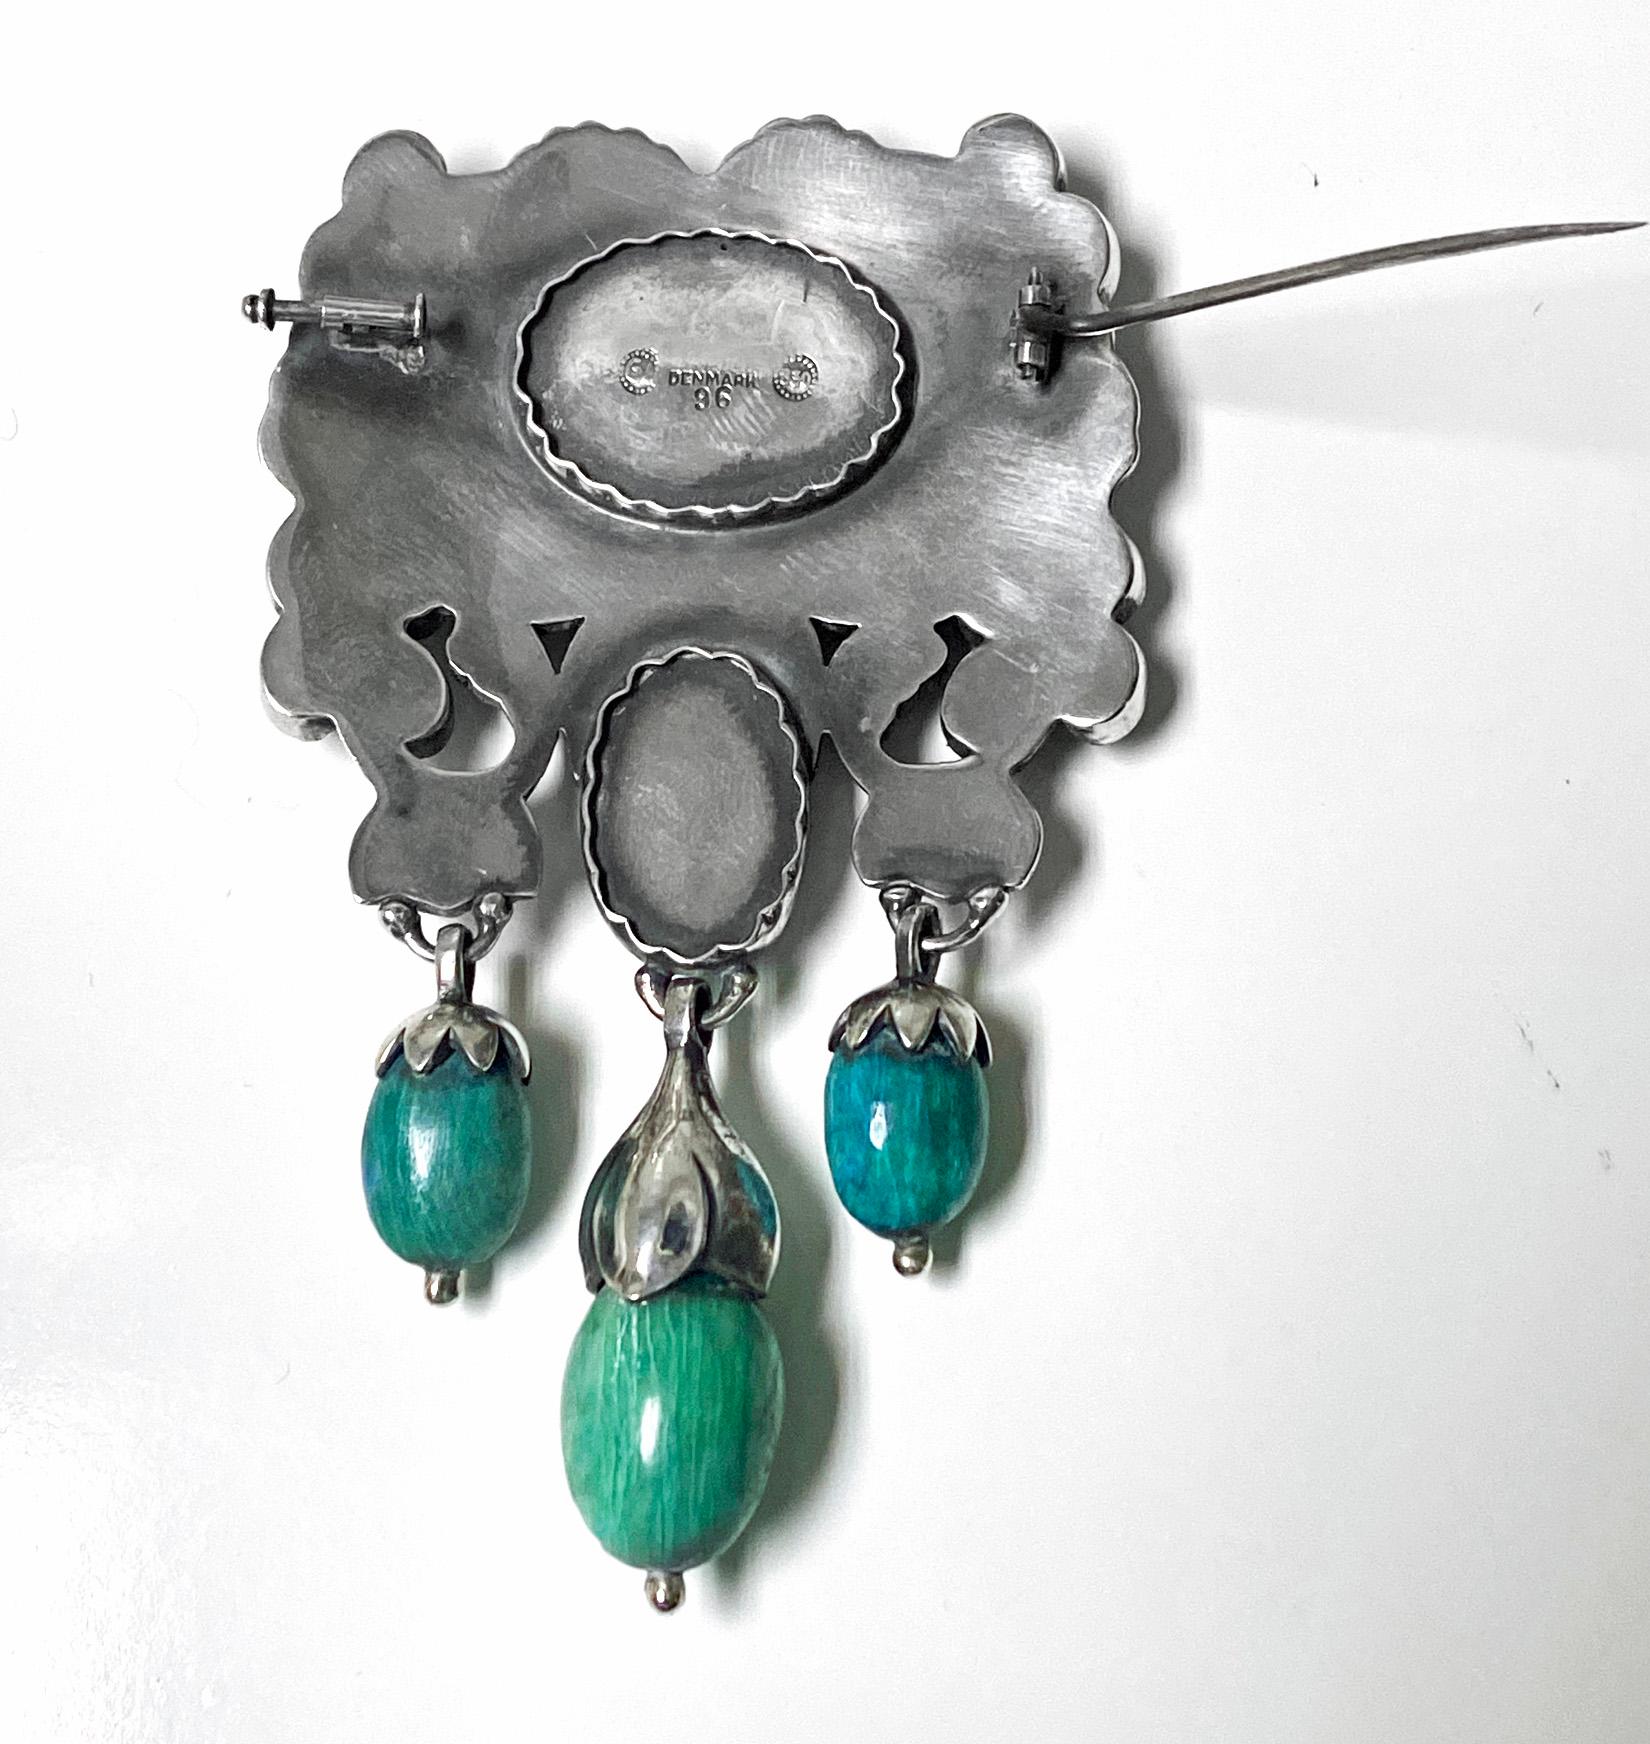 Cabochon Georg Jensen Silver and Amazonite Master Brooch, C.1915